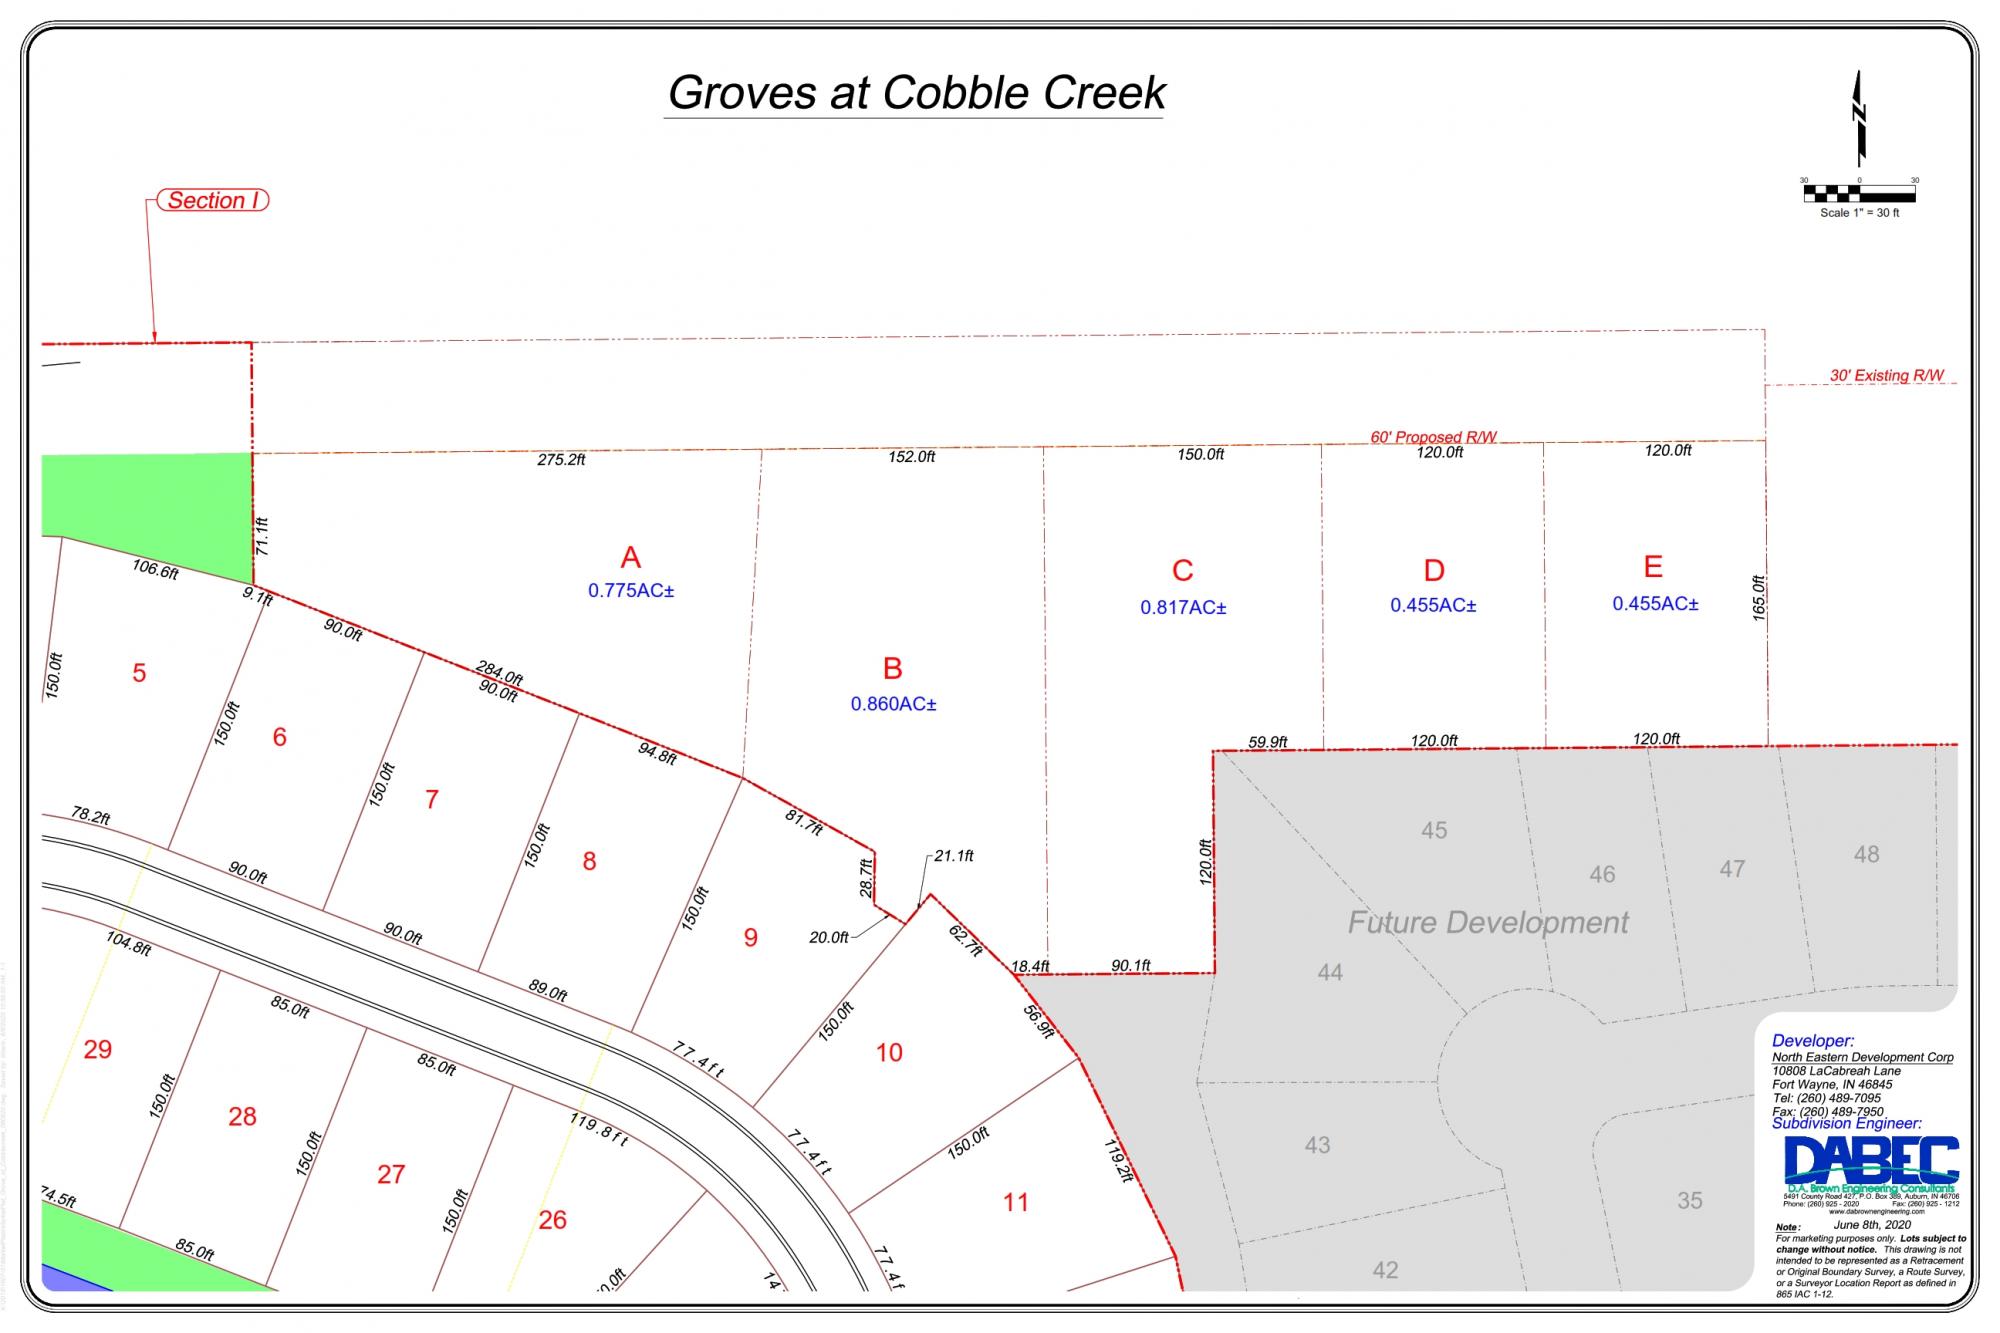 The Groves at Cobble Creek